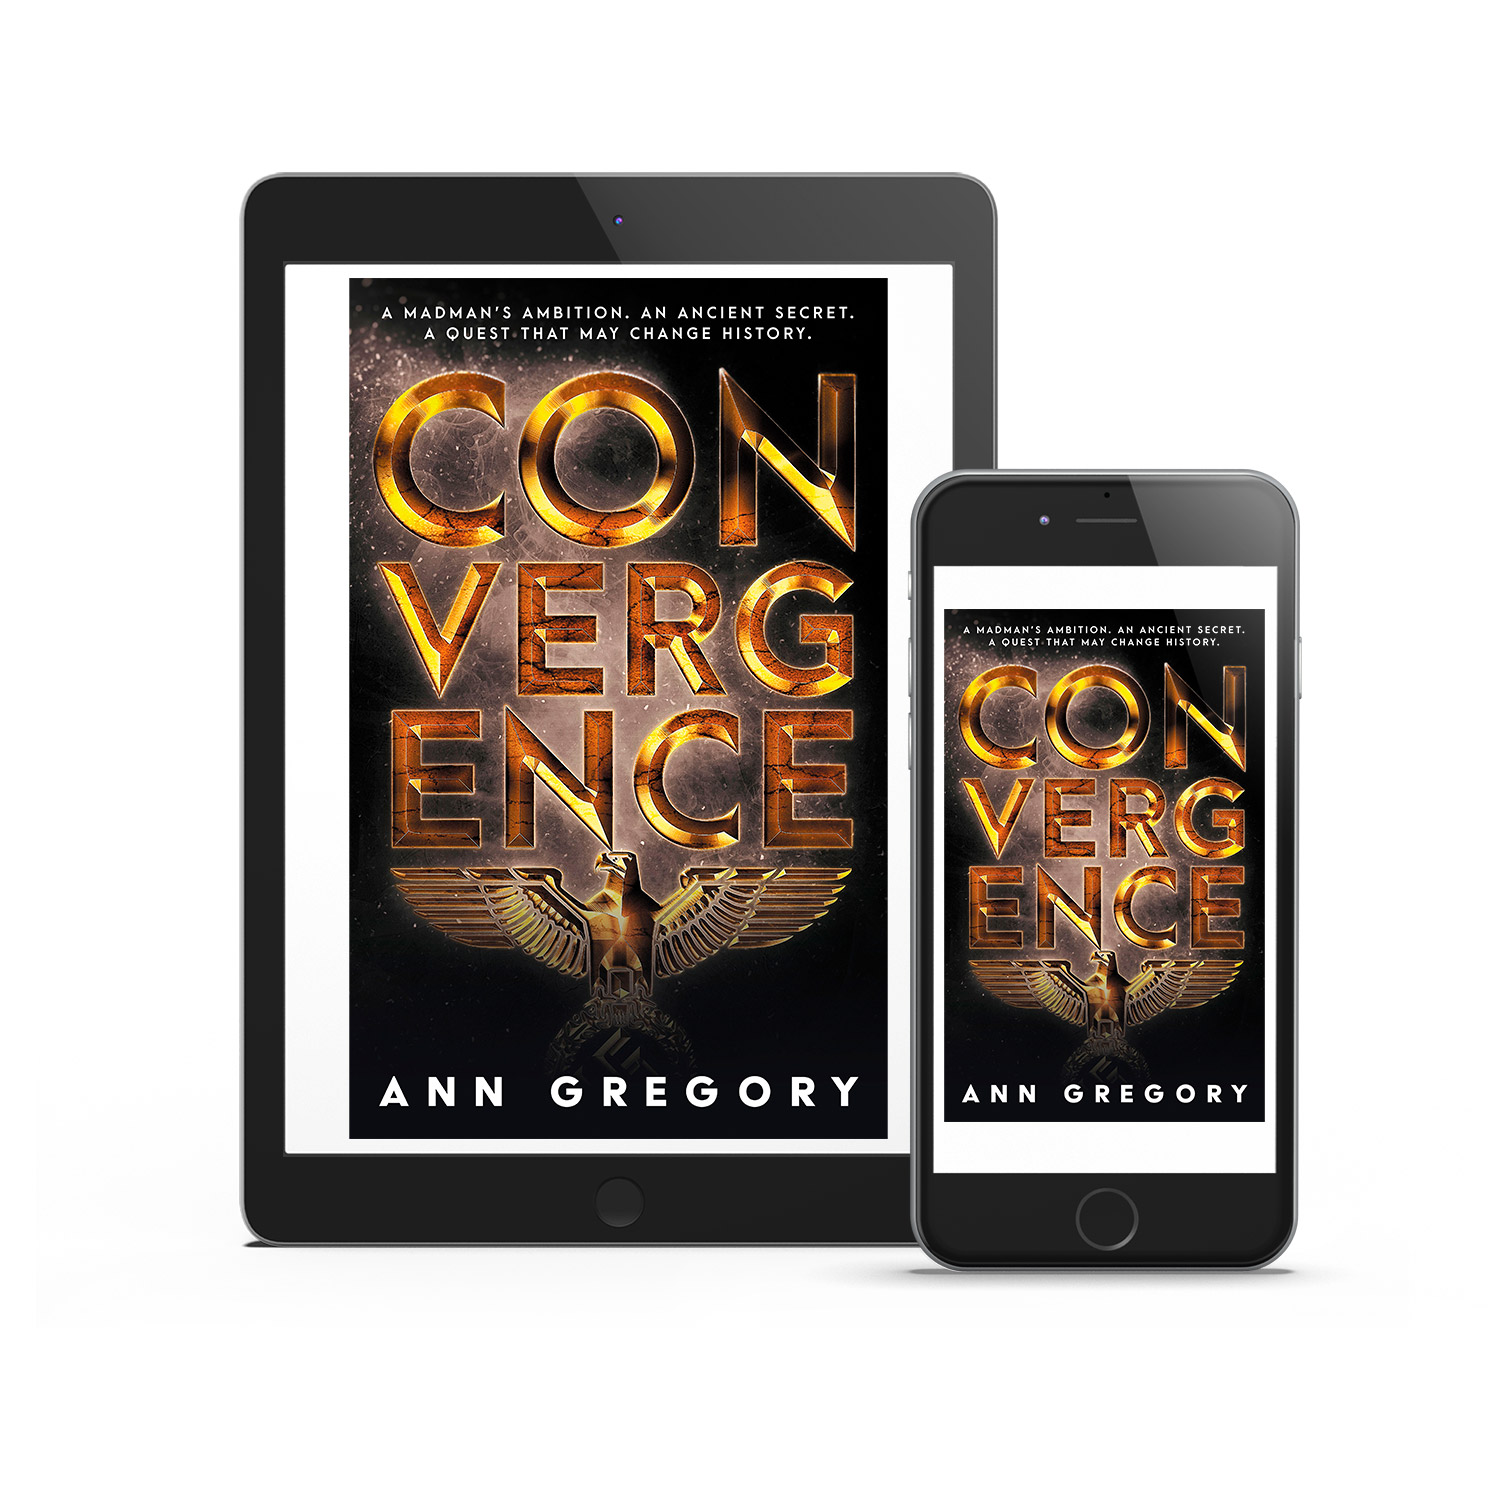 'Convergence' is a globe-trotting, pre-WWII conspiracy thriller. The author is Ann Gregory. The book cover design is by Mark Thomas. To learn more about what Mark could do for your book, please visit coverness.com.